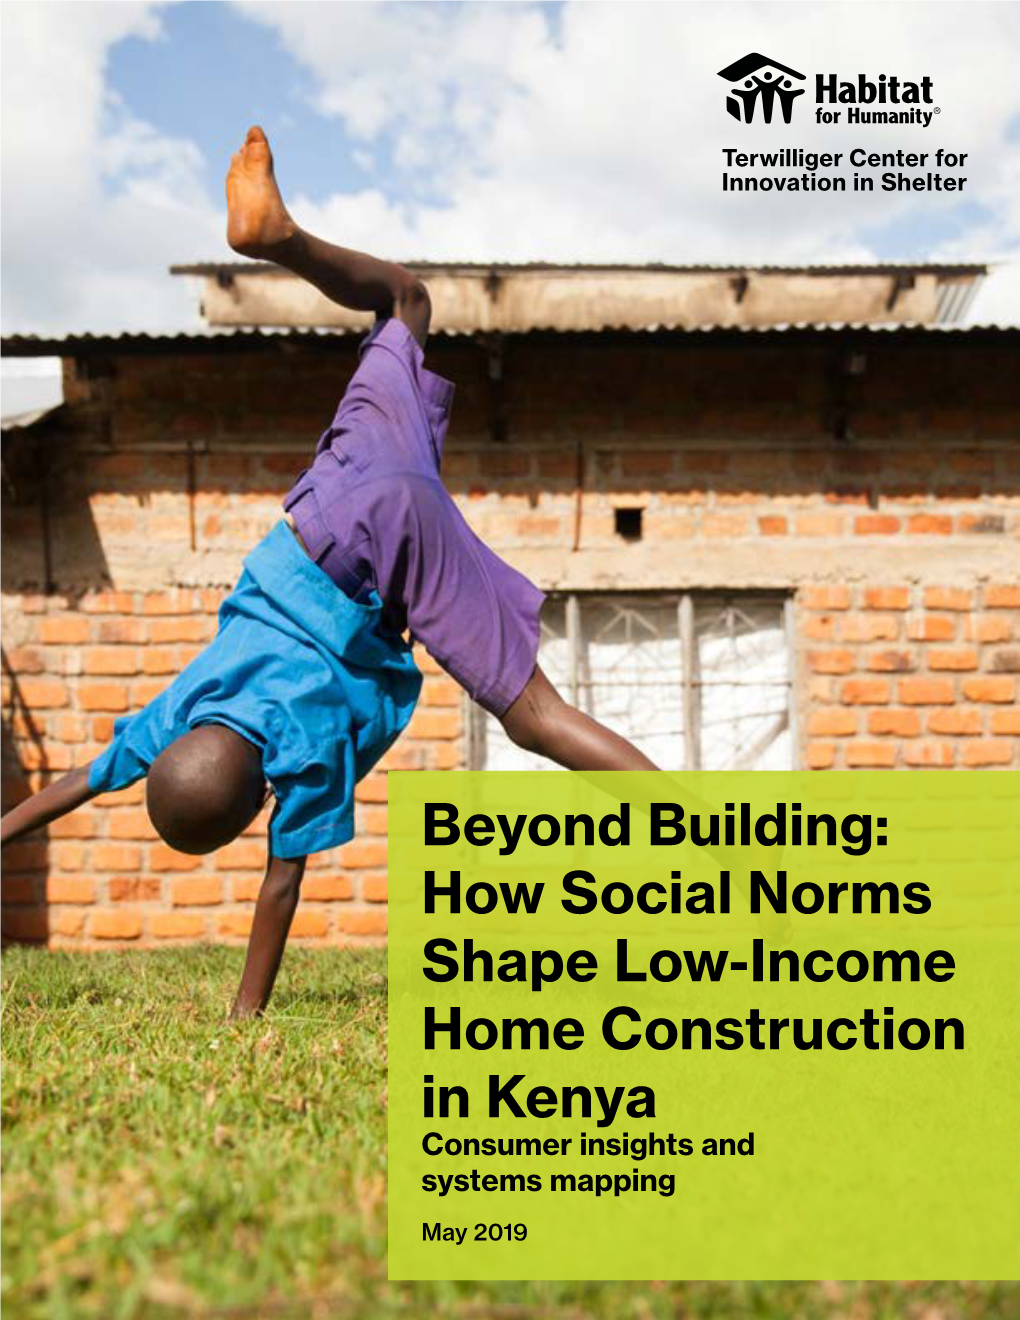 Beyond Building: How Social Norms Shape Low-Income Home Construction in Kenya Consumer Insights and Systems Mapping